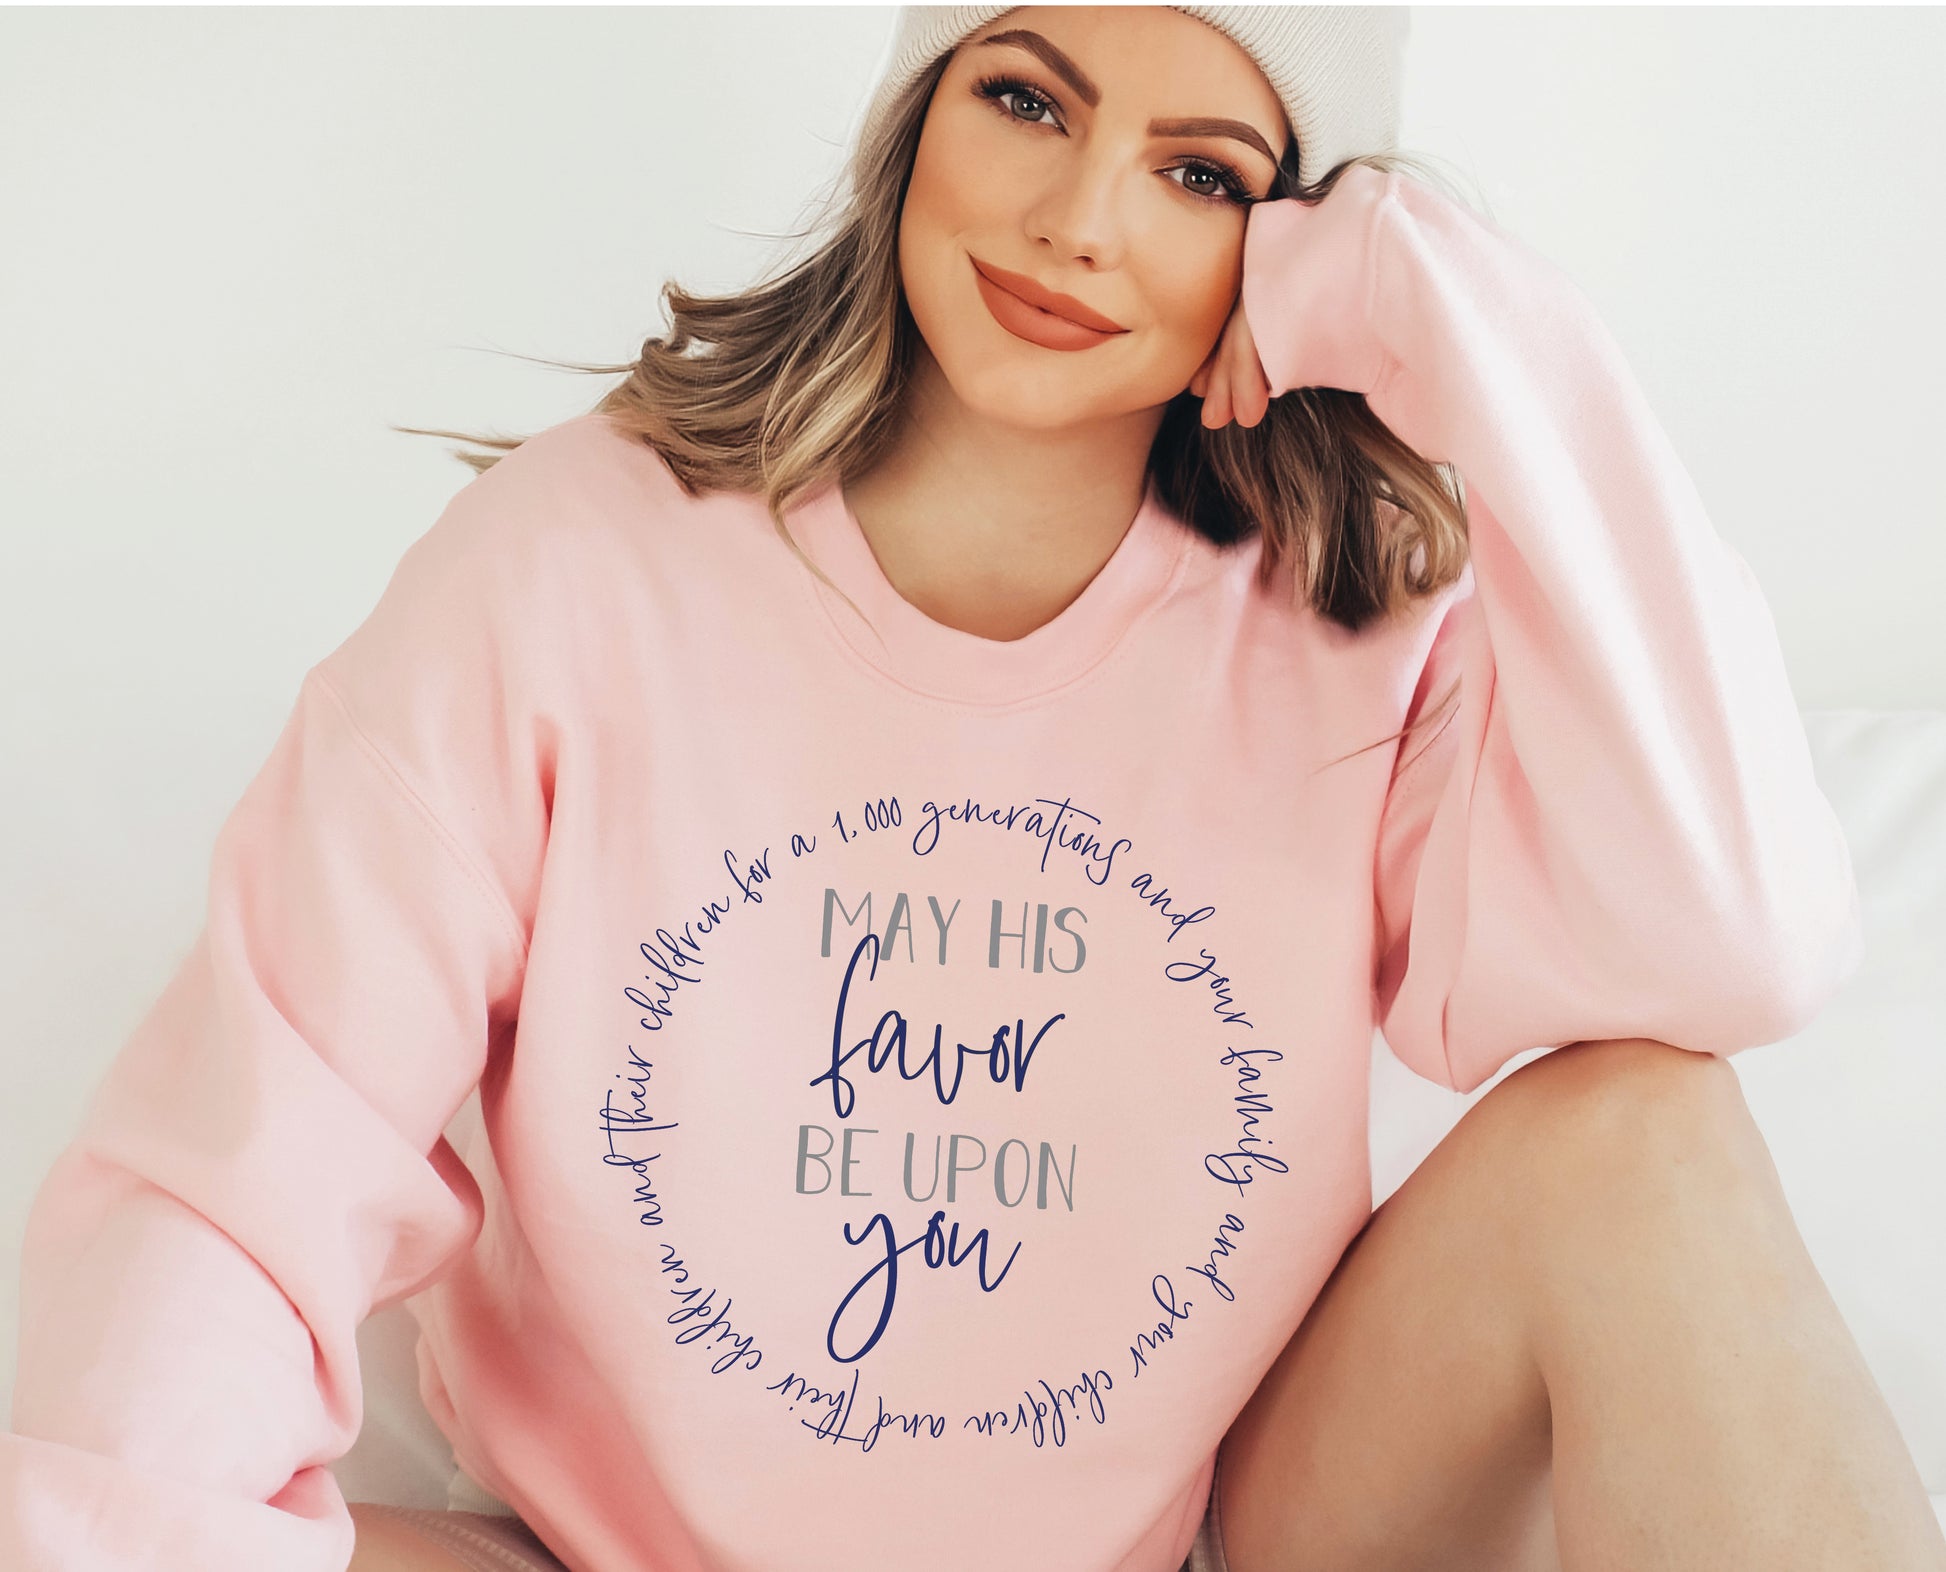 May His Favor Be Upon You family & children Numbers 6 The Blessing Christian aesthetic circle design printed on cozy light pink unisex crewneck shirt for women